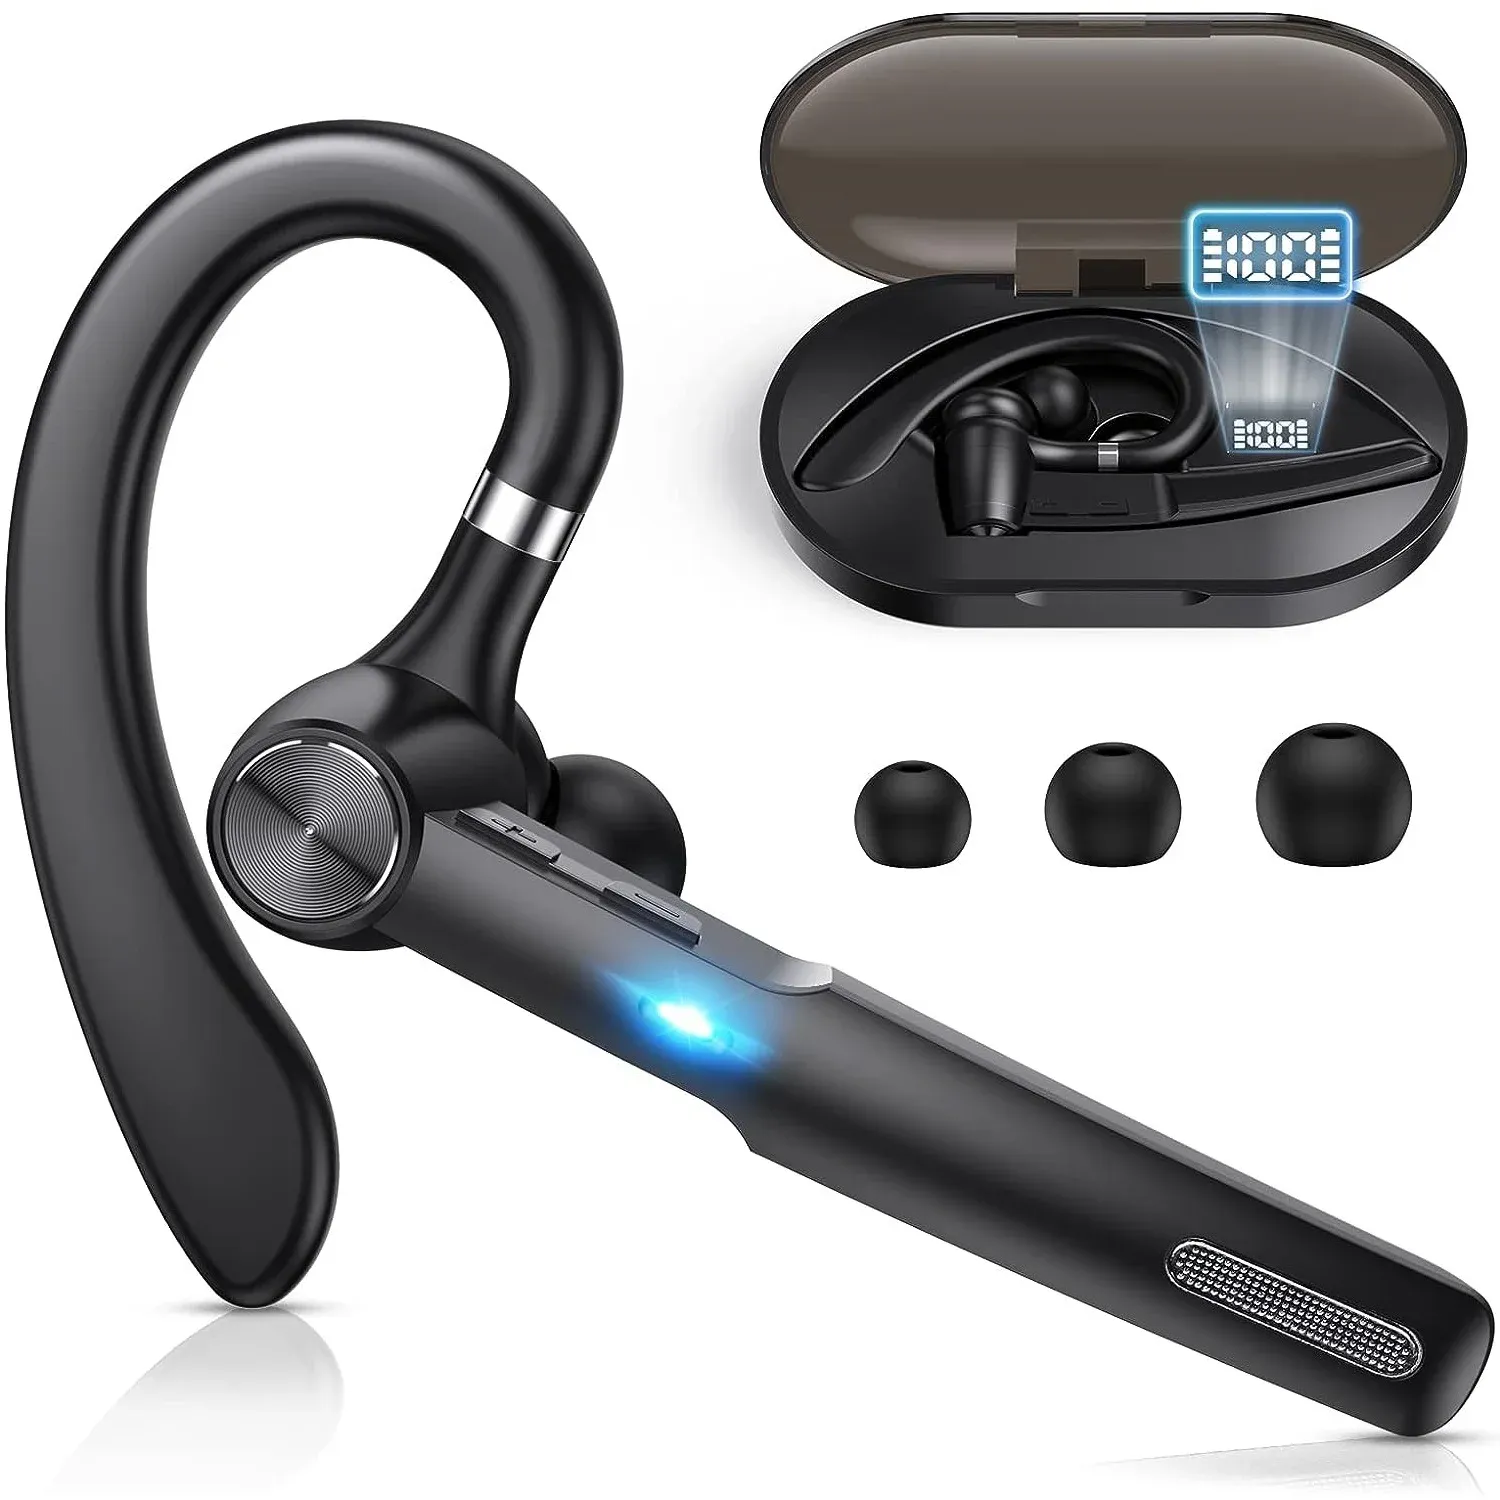 Bluetooth Headset,Bluetooth Earpiece with Charging Case,Hands-Free Wireless Earphones Built-in Mic for Driving/Business/Office